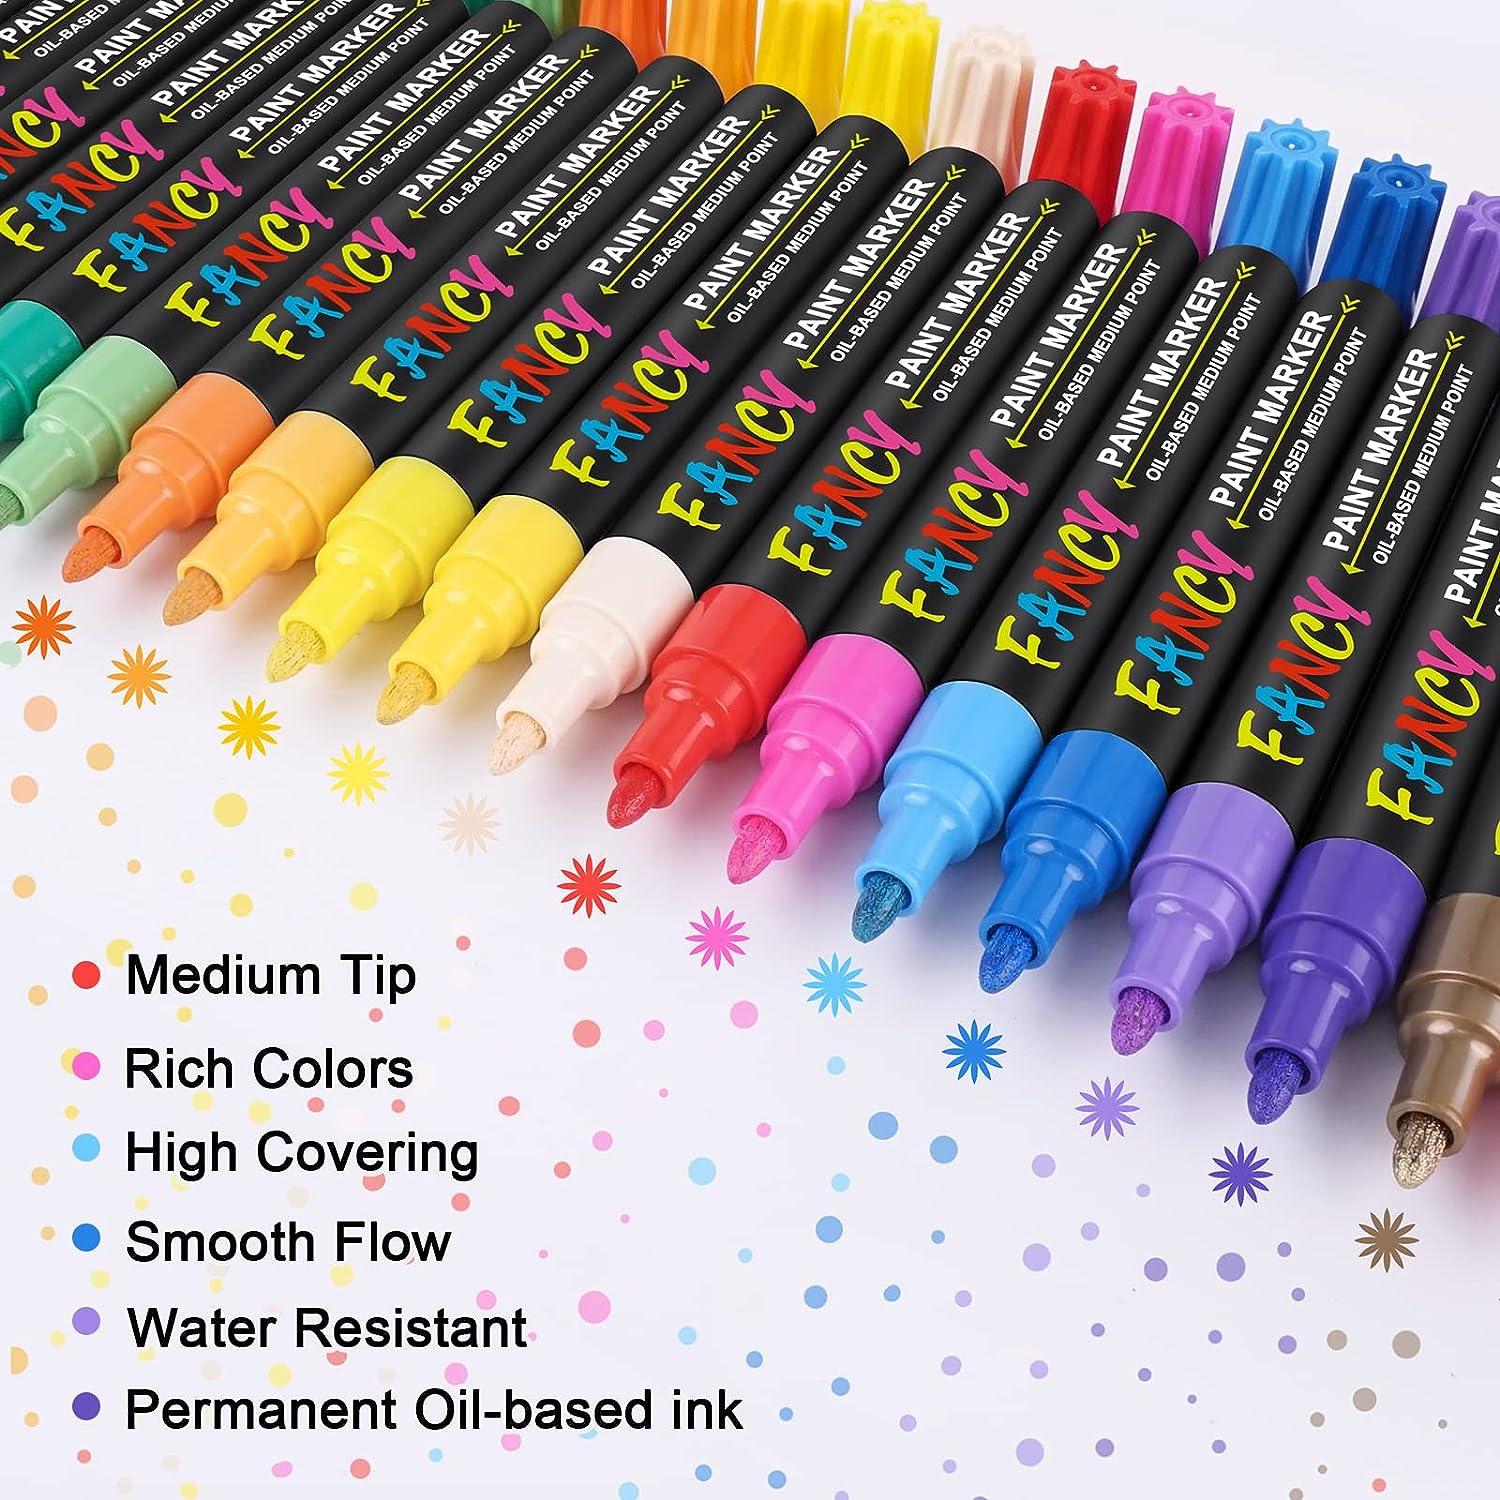 IVSUN Paint Pens Paint Markers, 20 Colors Oil-Based Waterproof Paint Marker Pen Set, Never Fade Quick Dry and Permanent, Works on Rocks Painting, Wood